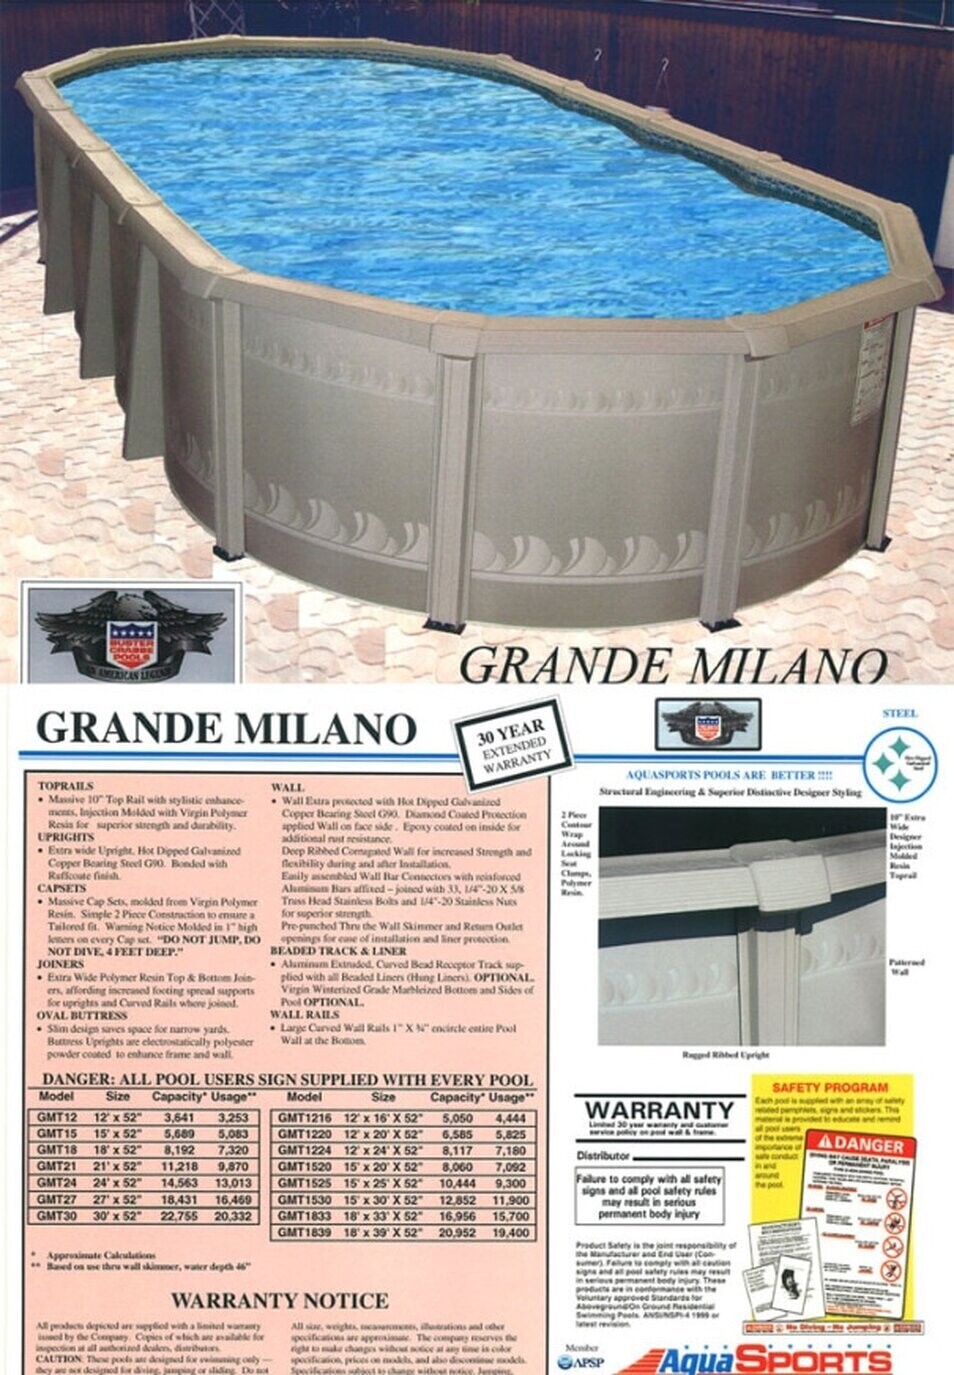 Grande Milano Avove Ground Oval Pools By Buster Crabbe / Aquasports